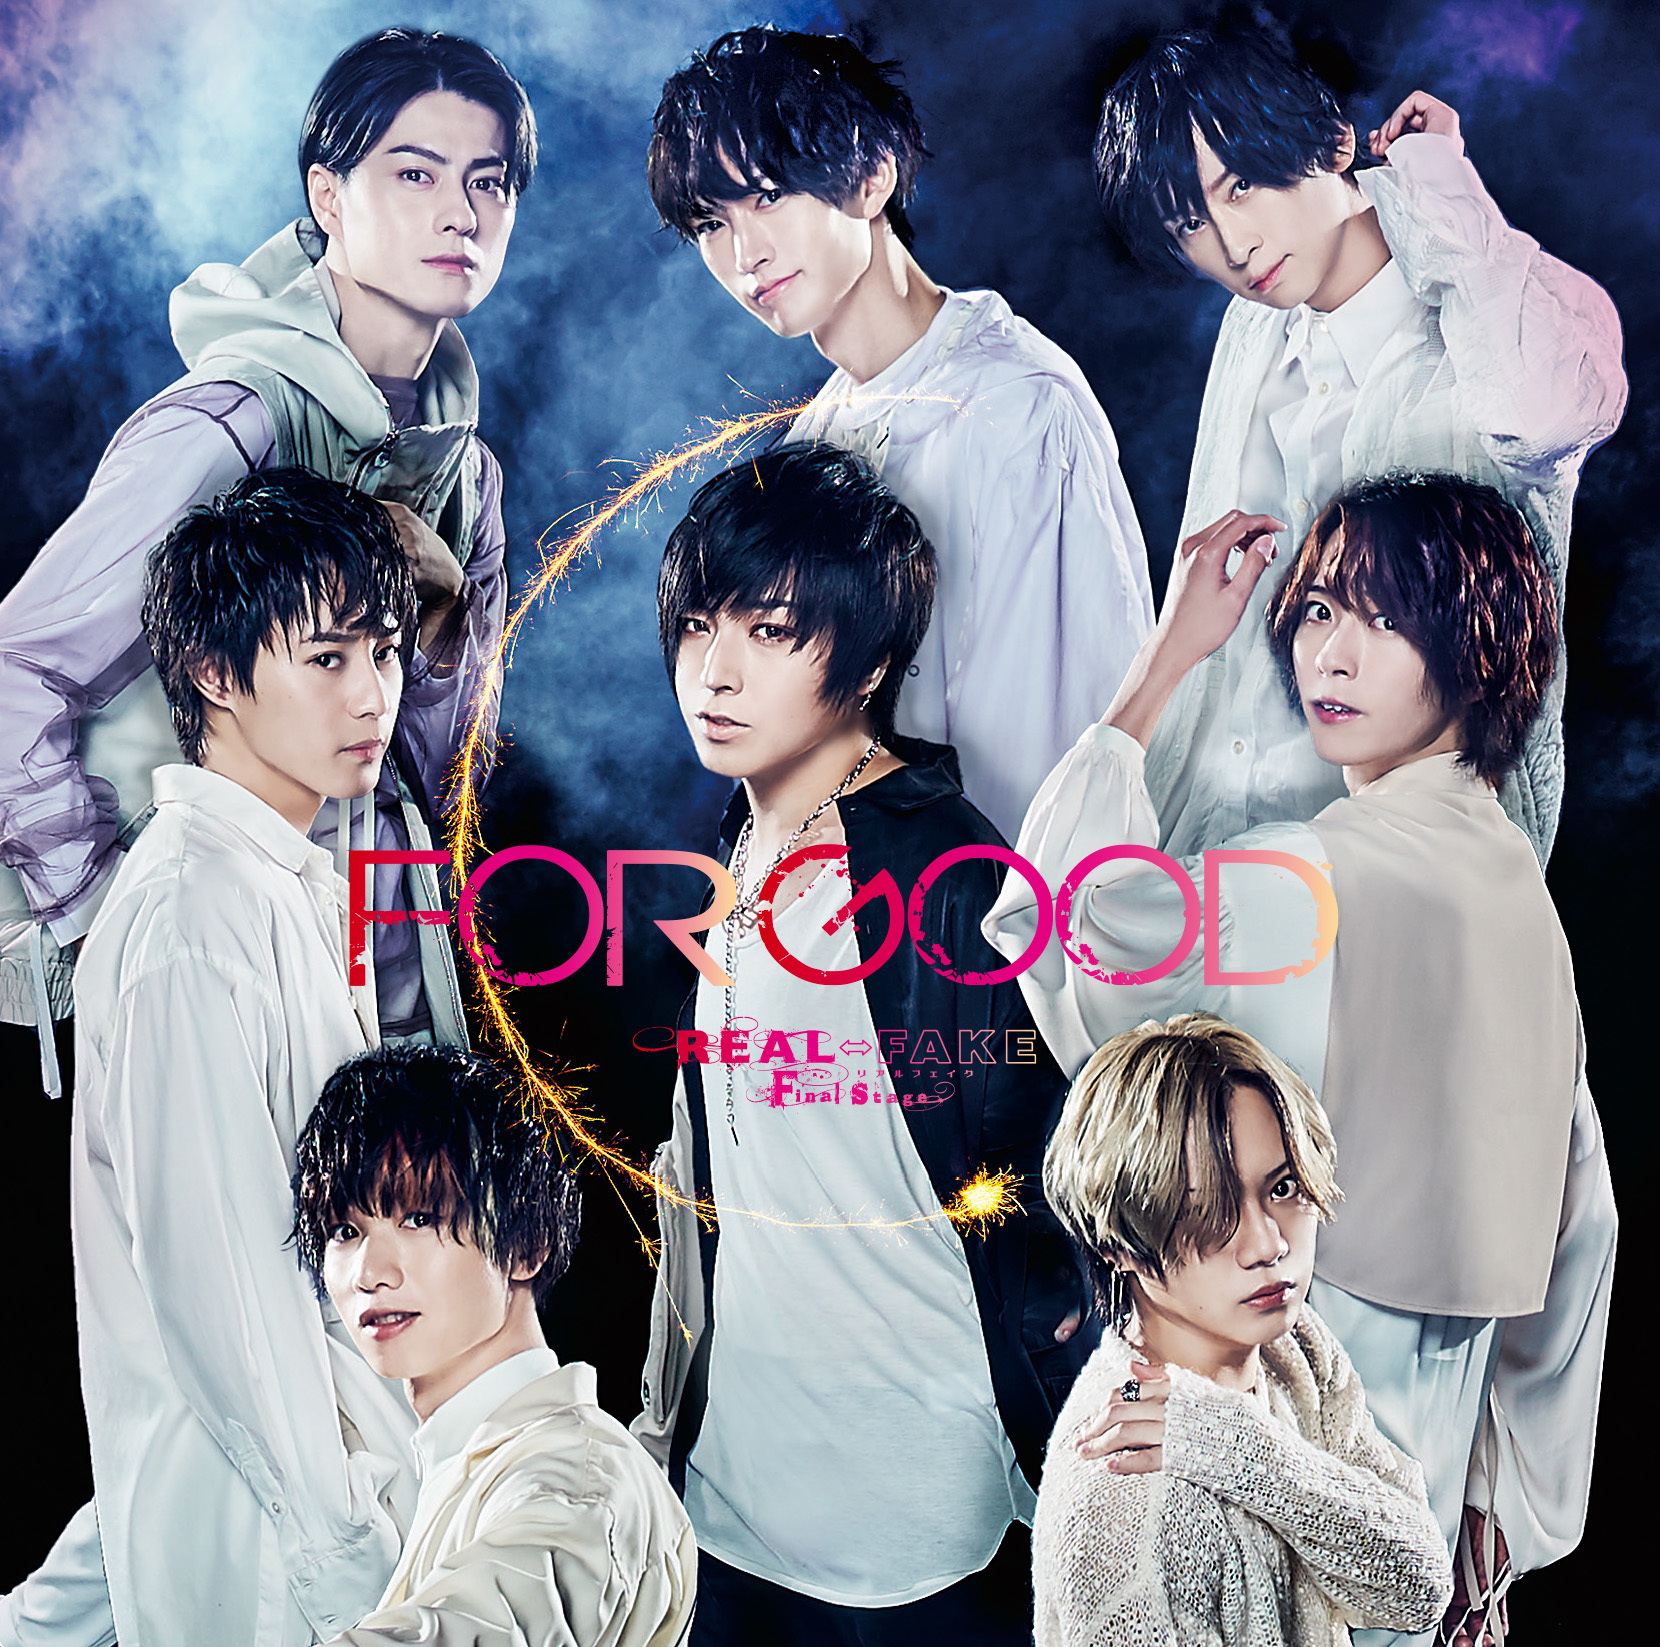 『REAL⇔FAKE Final Stage』Music CDアルバム『FOR GOOD』通常盤